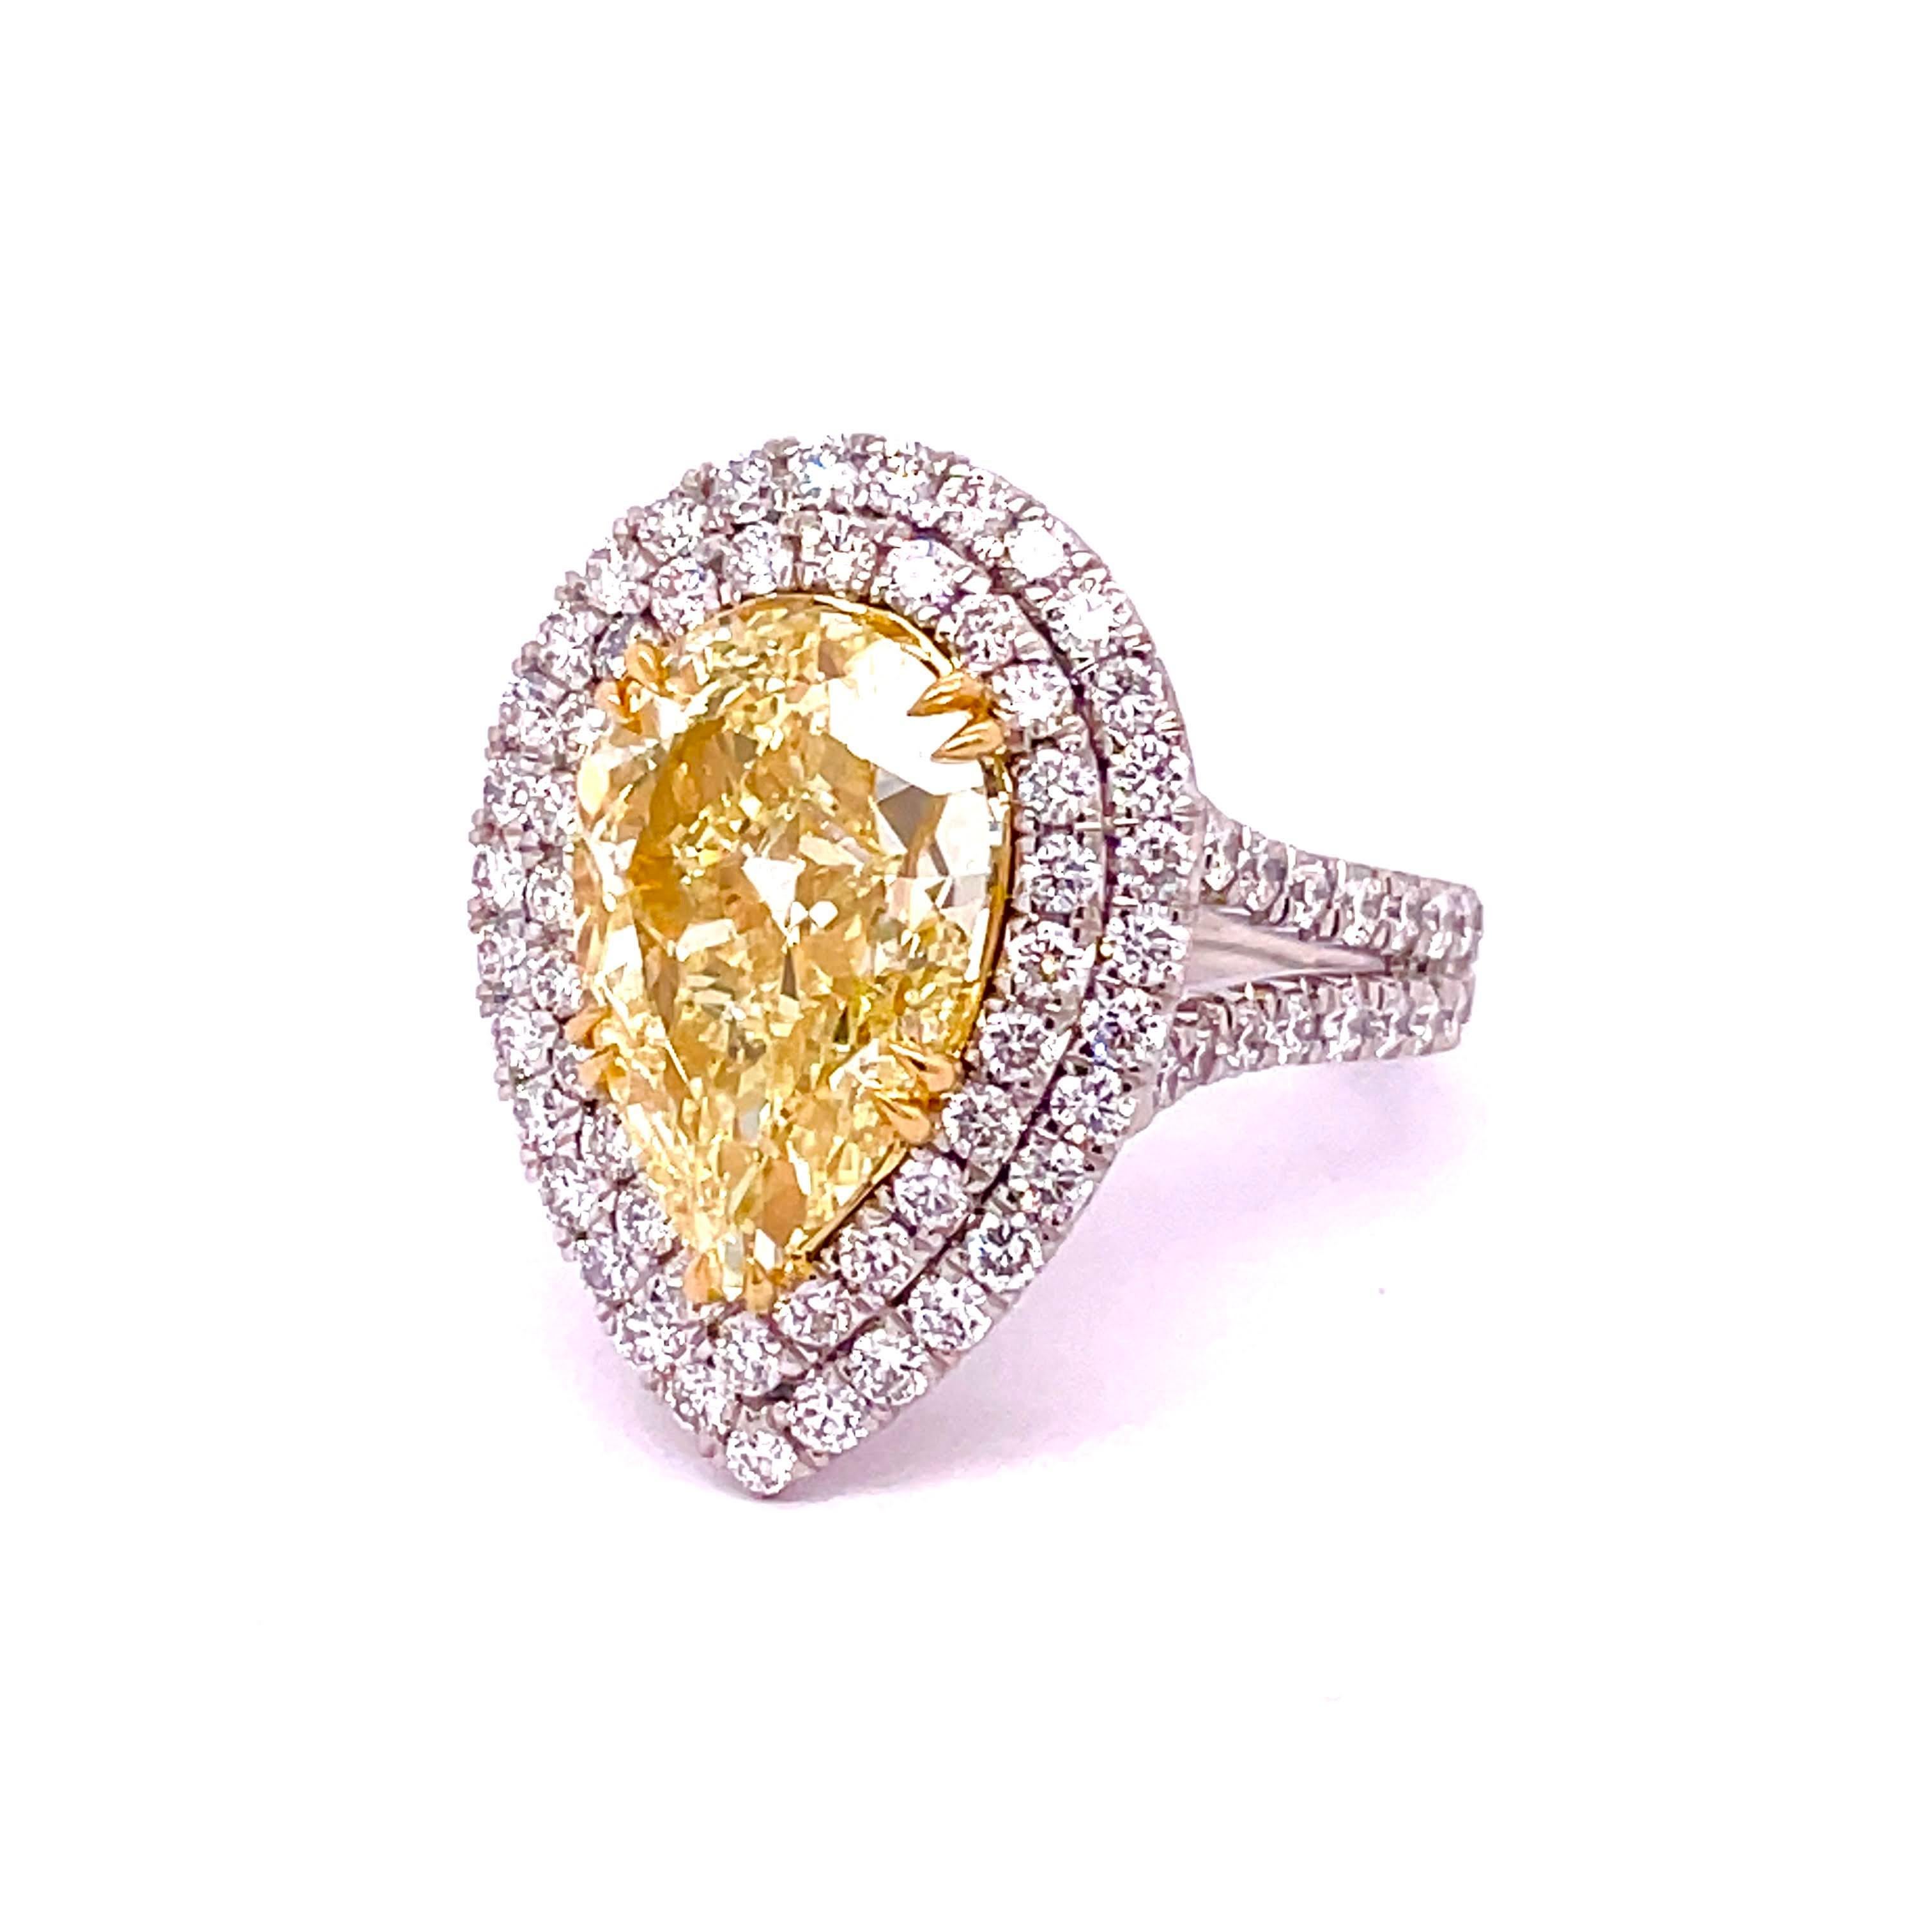 GIA Certified Pear Shape Diamond 6.02, Fancy Yellow Color VS2 Clarity mounted flawlessly on a 18K Yellow basket with claw prongs bringing out more vibrancy to the center diamond. Surrounded by 2.11 carat round diamonds for the double halo and split